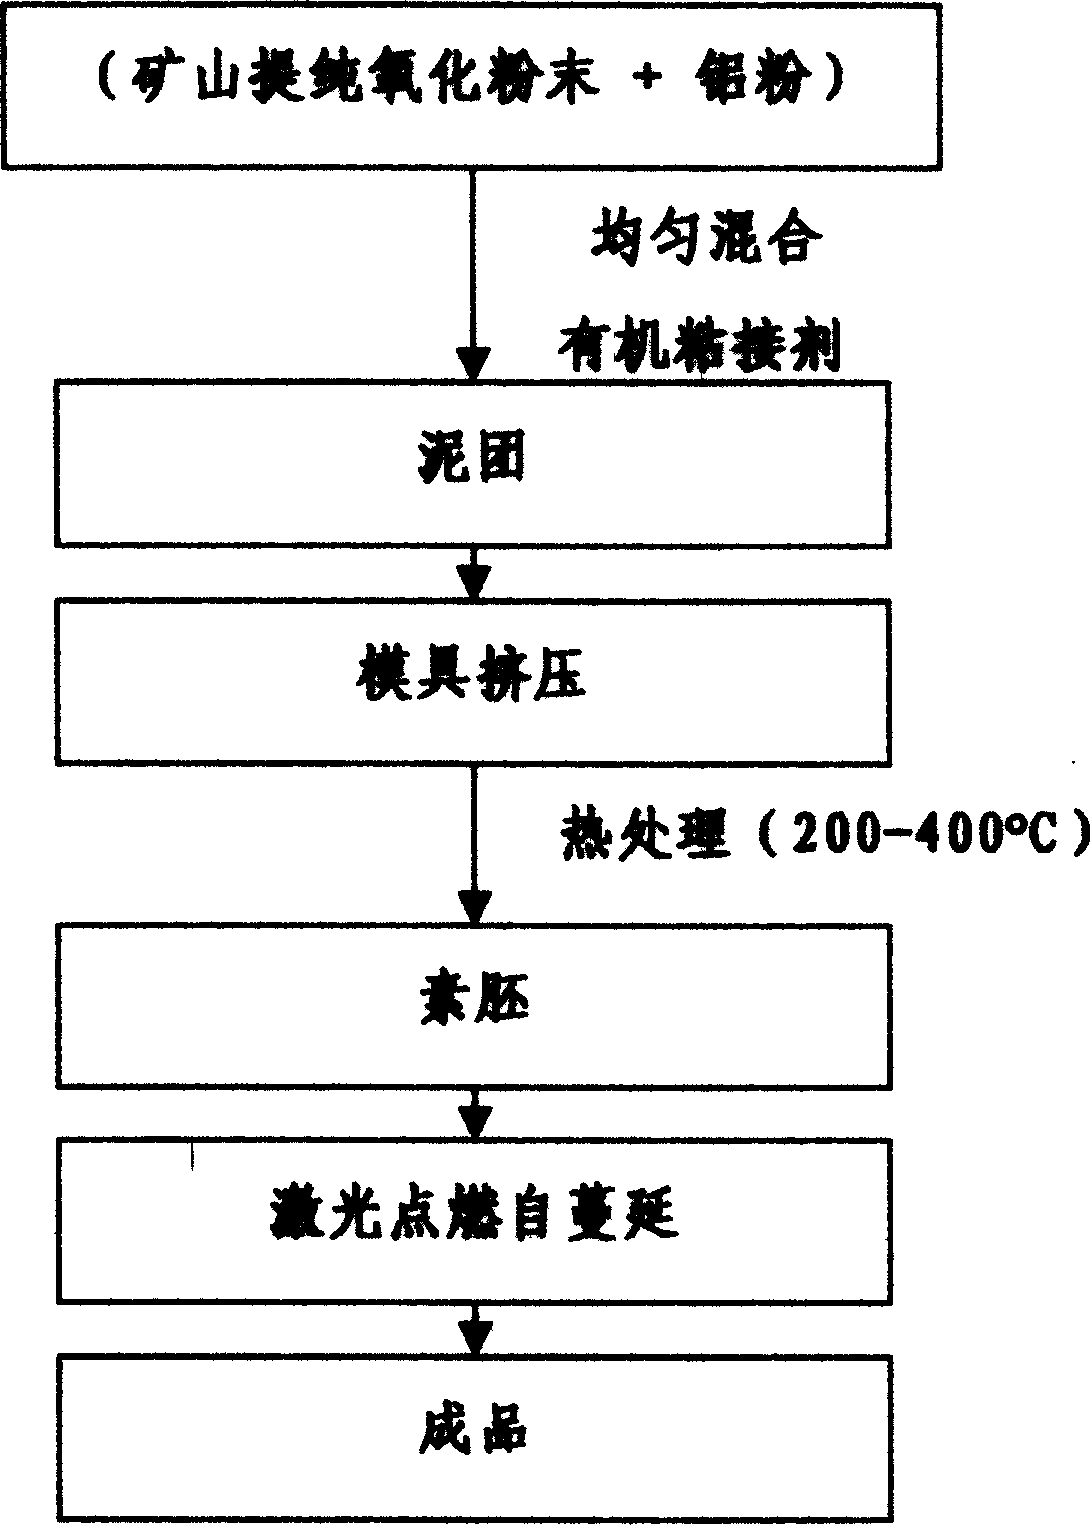 Conductive honey comb ceramic catalyst carrier and its preparation method